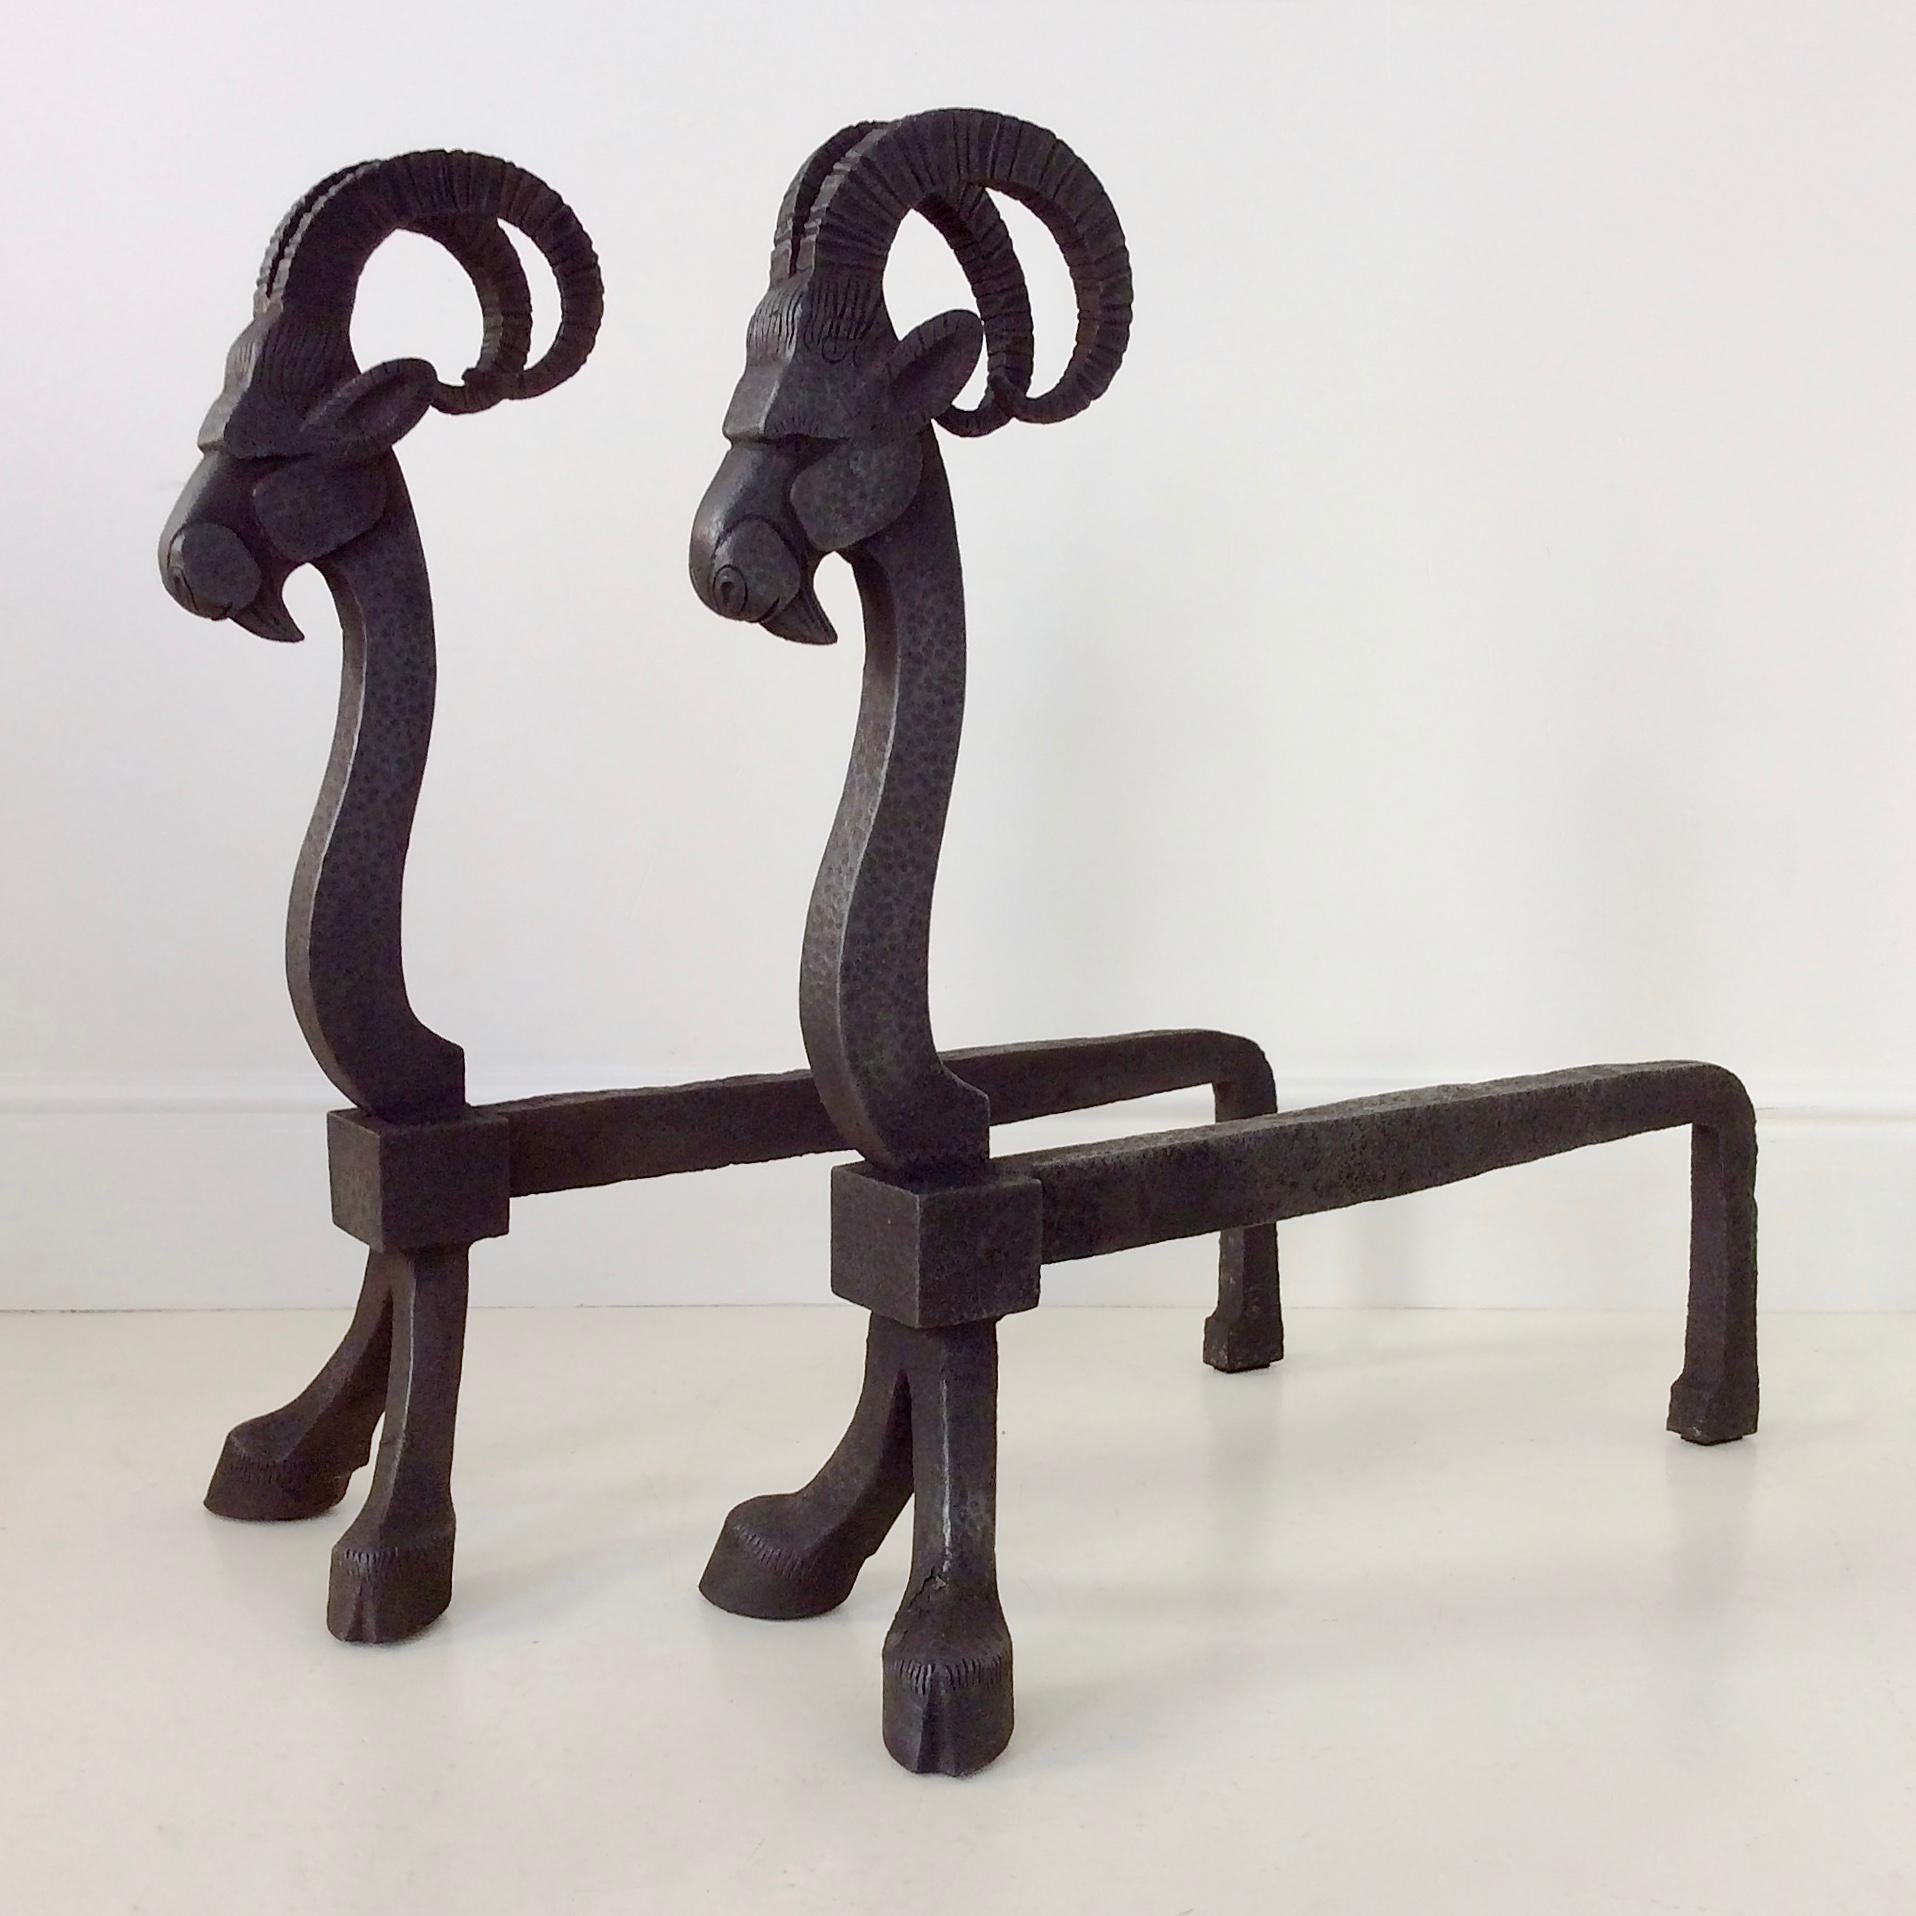 Fine pair of andirons.
Stylized goats with big ringed horns.
Hammered wrought iron. Refined metal work.
Dimensions of each item: 51 cm H, 50 cm D, 18 cm W.
All purchases are covered by our Buyer Protection Guarantee.
This item can be returned within